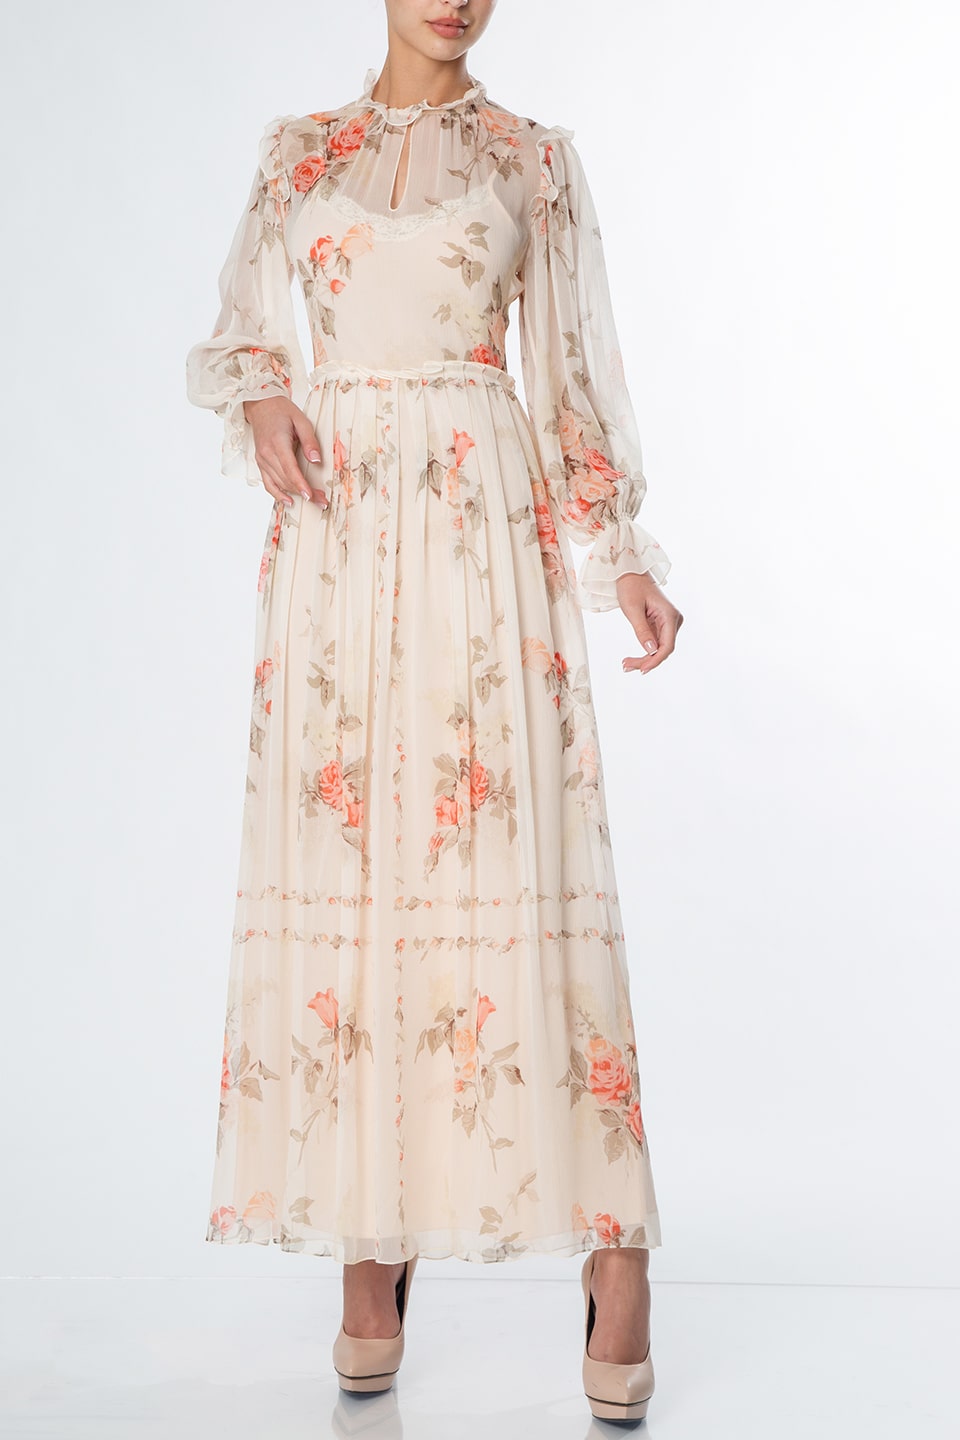 Midi dress from fashion designer in peach pink color with floral print full product view